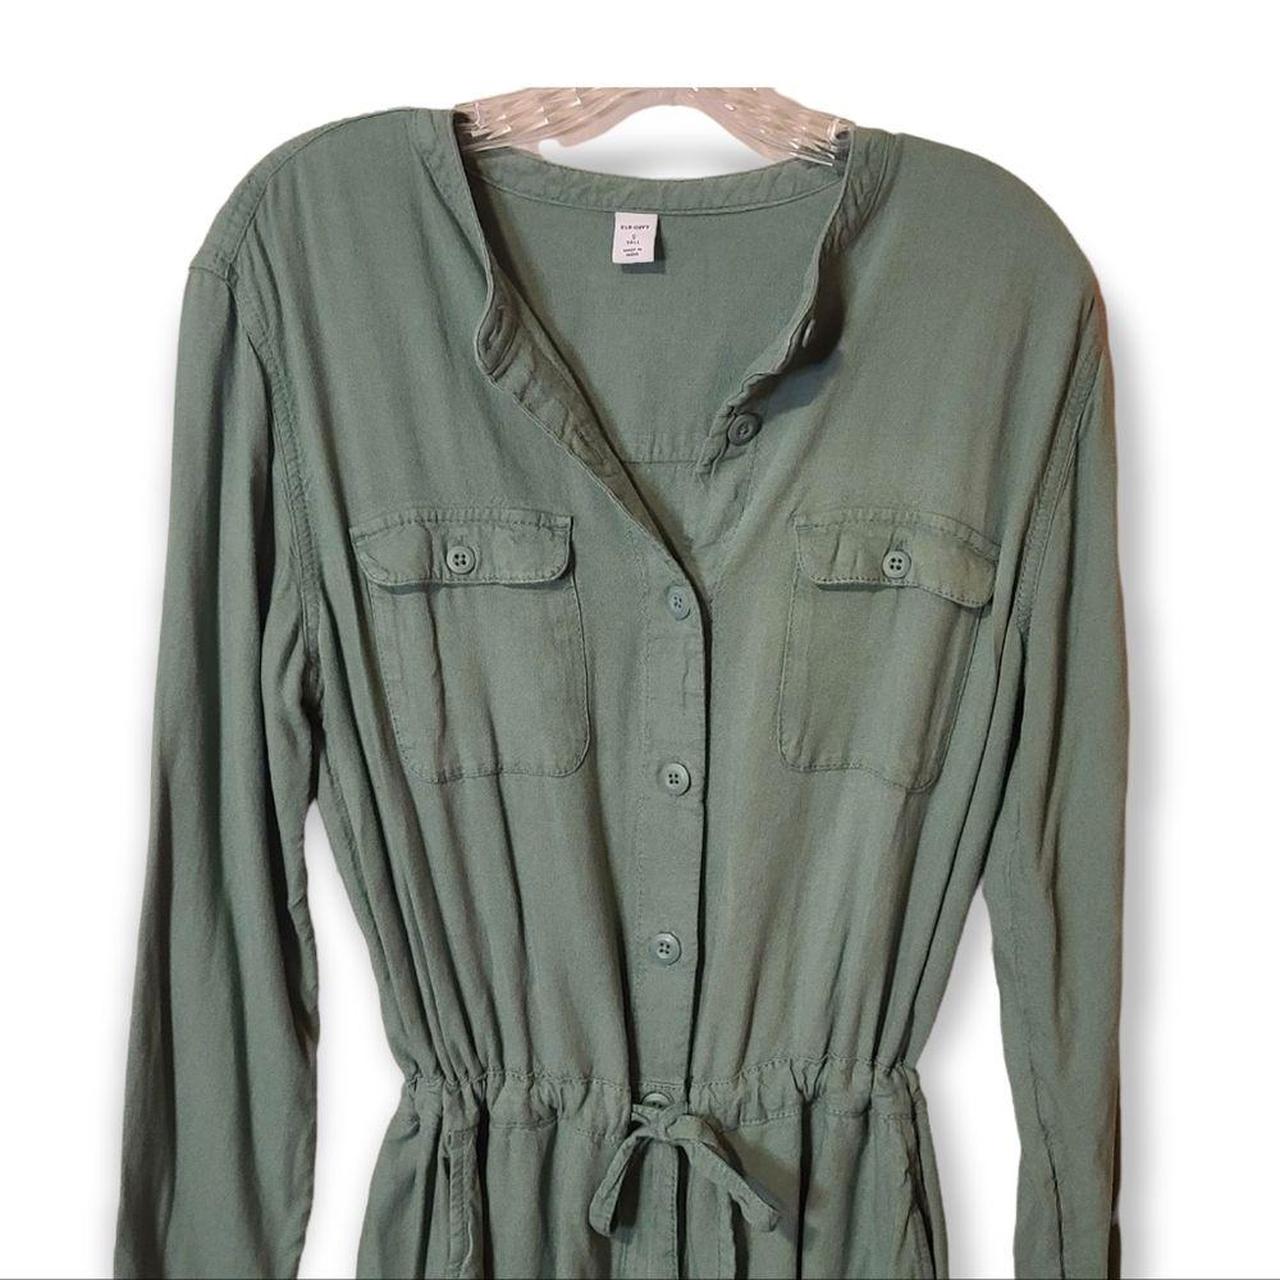 Product Image 2 - Old Navy Olive Green Romper,